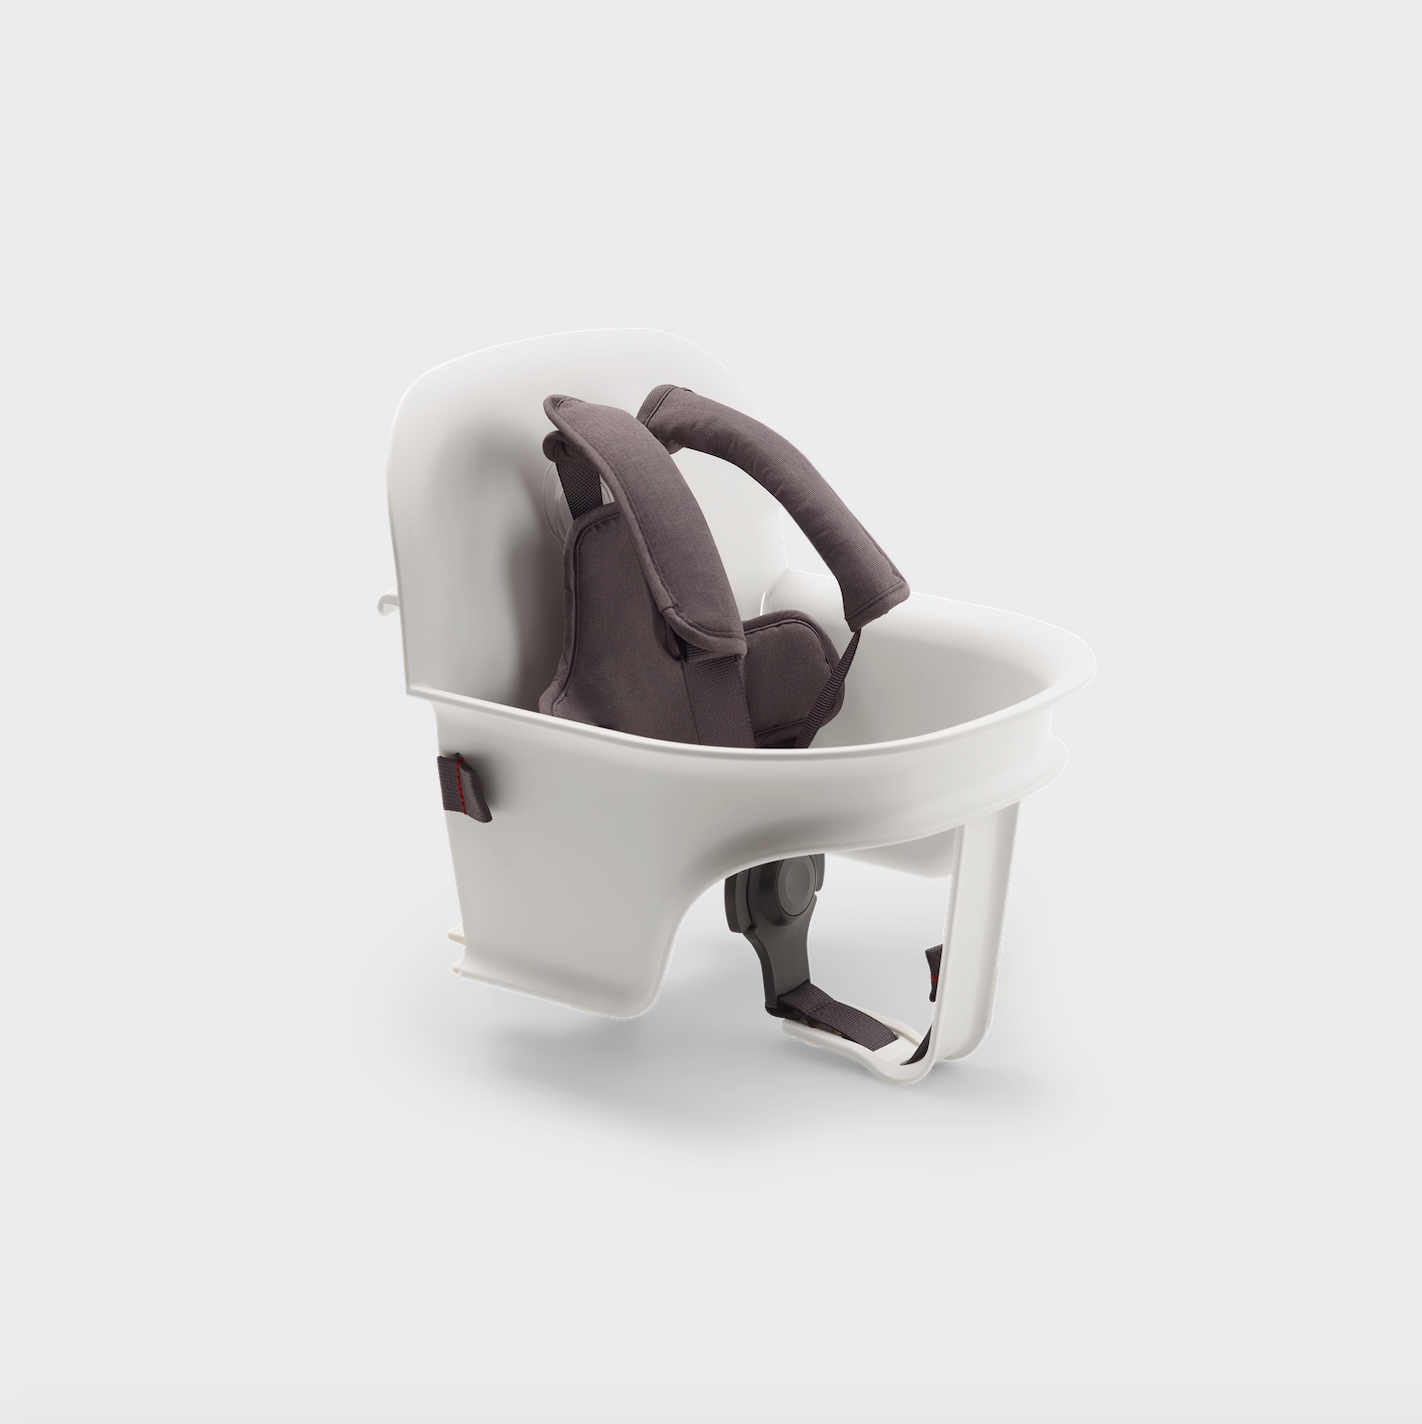 Bugaboo Giraffe Highchair with Baby Set, Pillow & Tray | White & Polar White | Direct4baby | Free Delivery